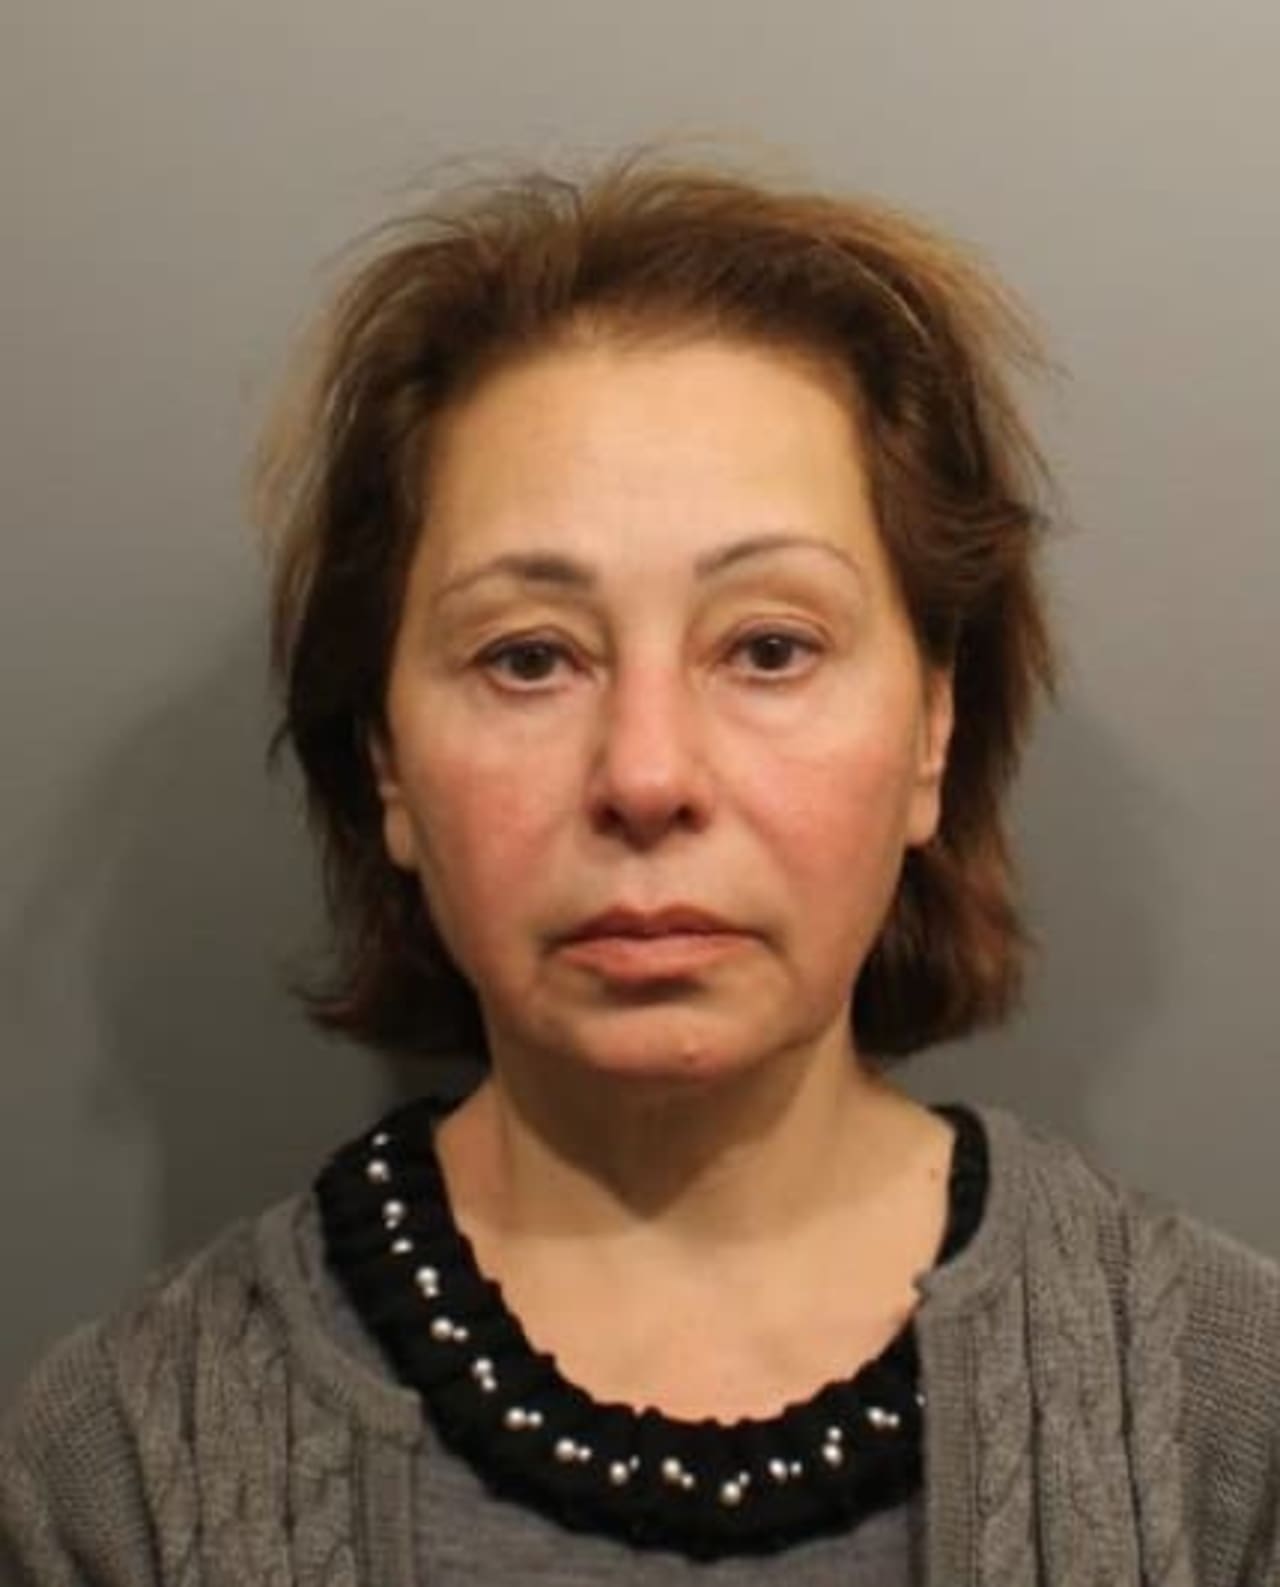 Simi Honarbakhsh, 61, of 12 Village Walk, was arrested Tuesday on charges of failing to appear in court.